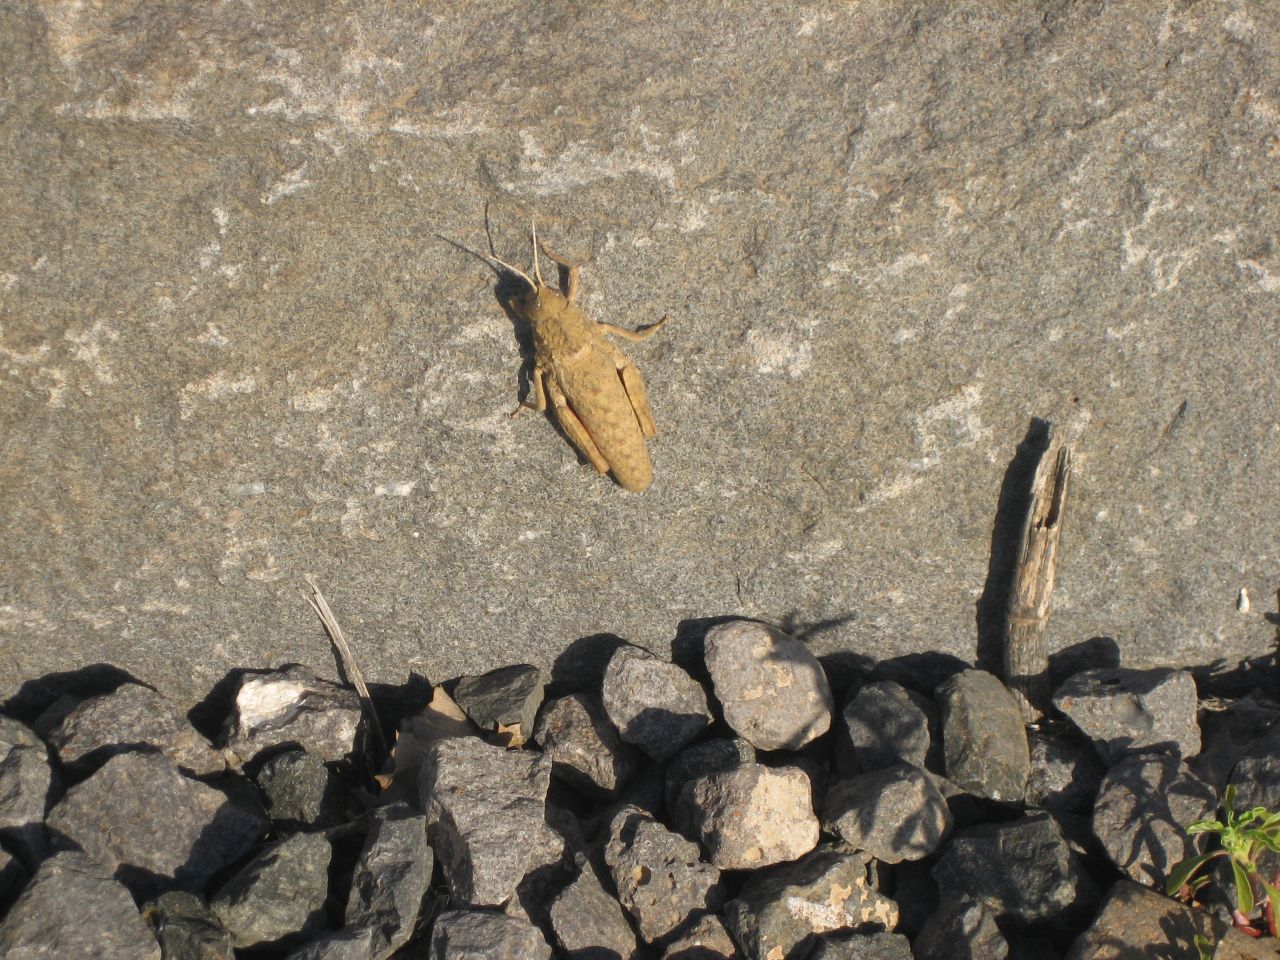 a large bug that is sitting on some rocks